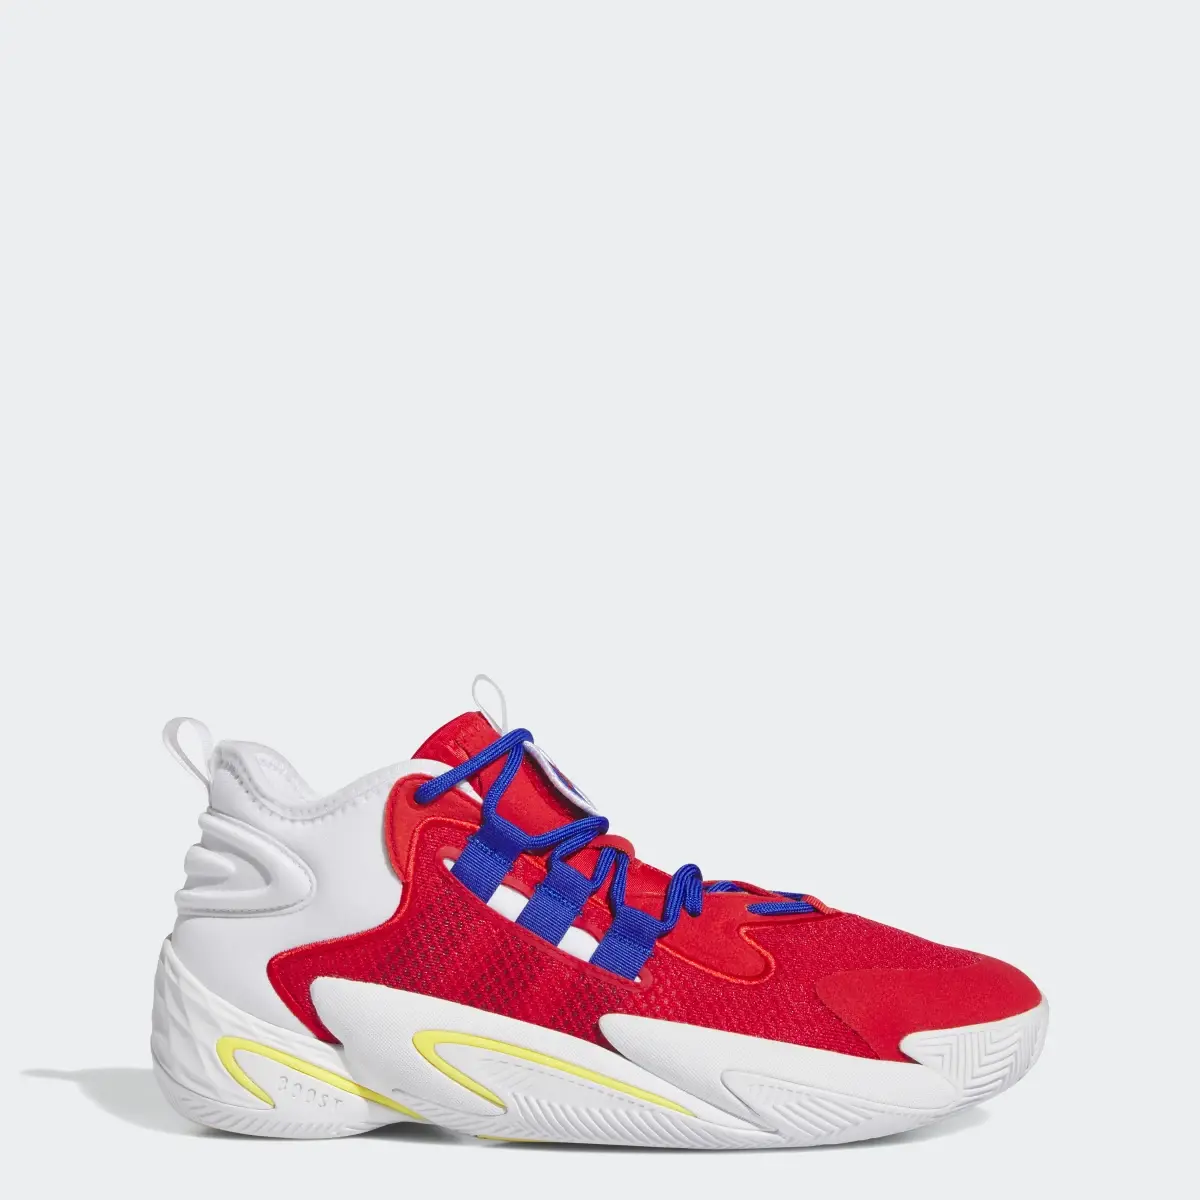 Adidas BYW Select Shoes. 1